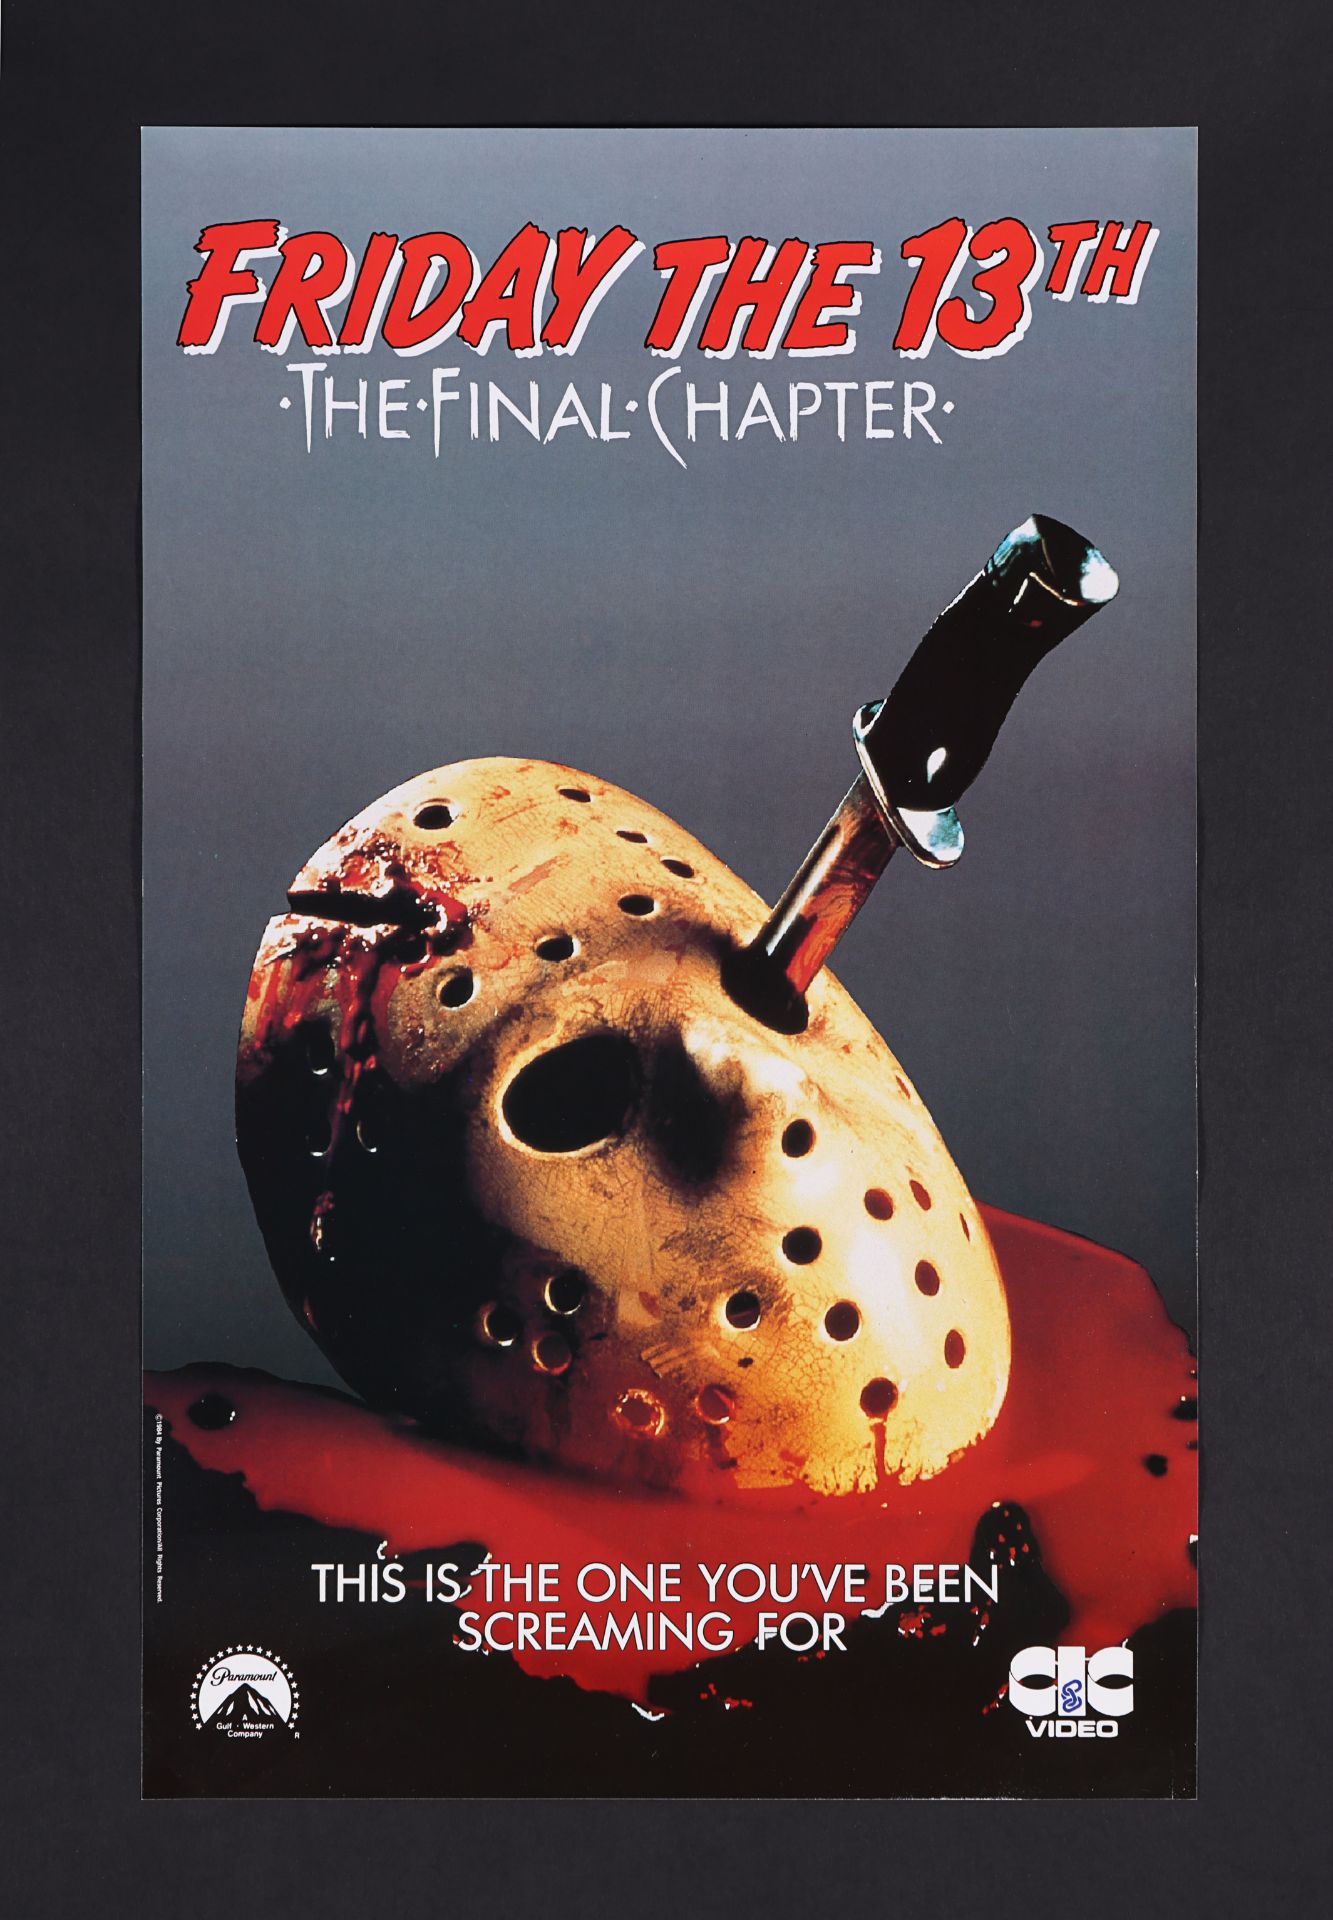 FRIDAY THE 13TH: VARIOUS PRODUCTIONS (1984 - 1989) - Six UK Video Posters, circa 1985 - 1990 - Image 2 of 6